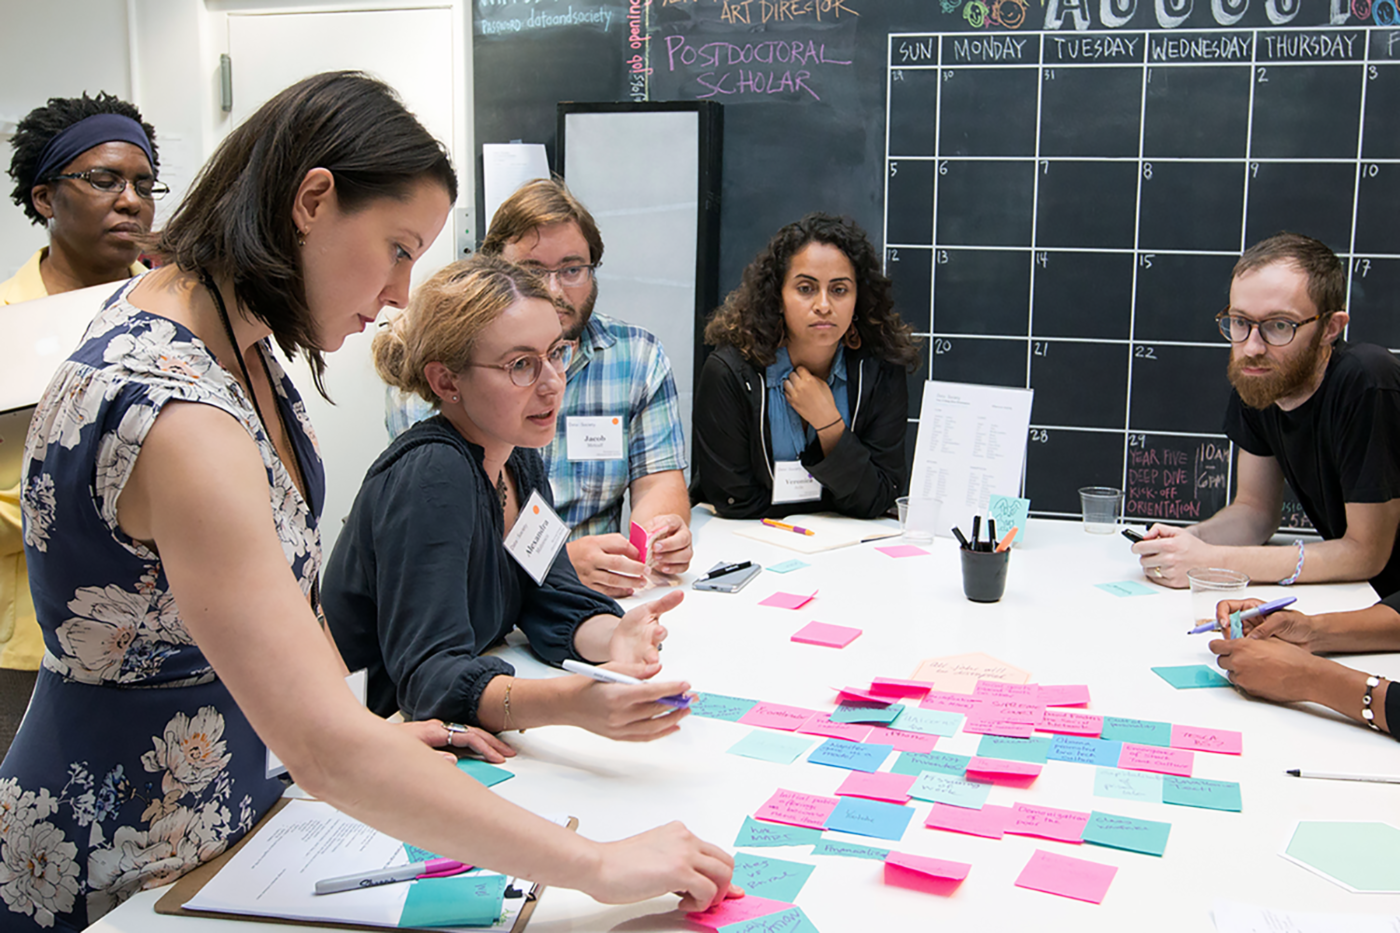 Group of people with serious expressions gathered around a white countertop with colorful post-it notes